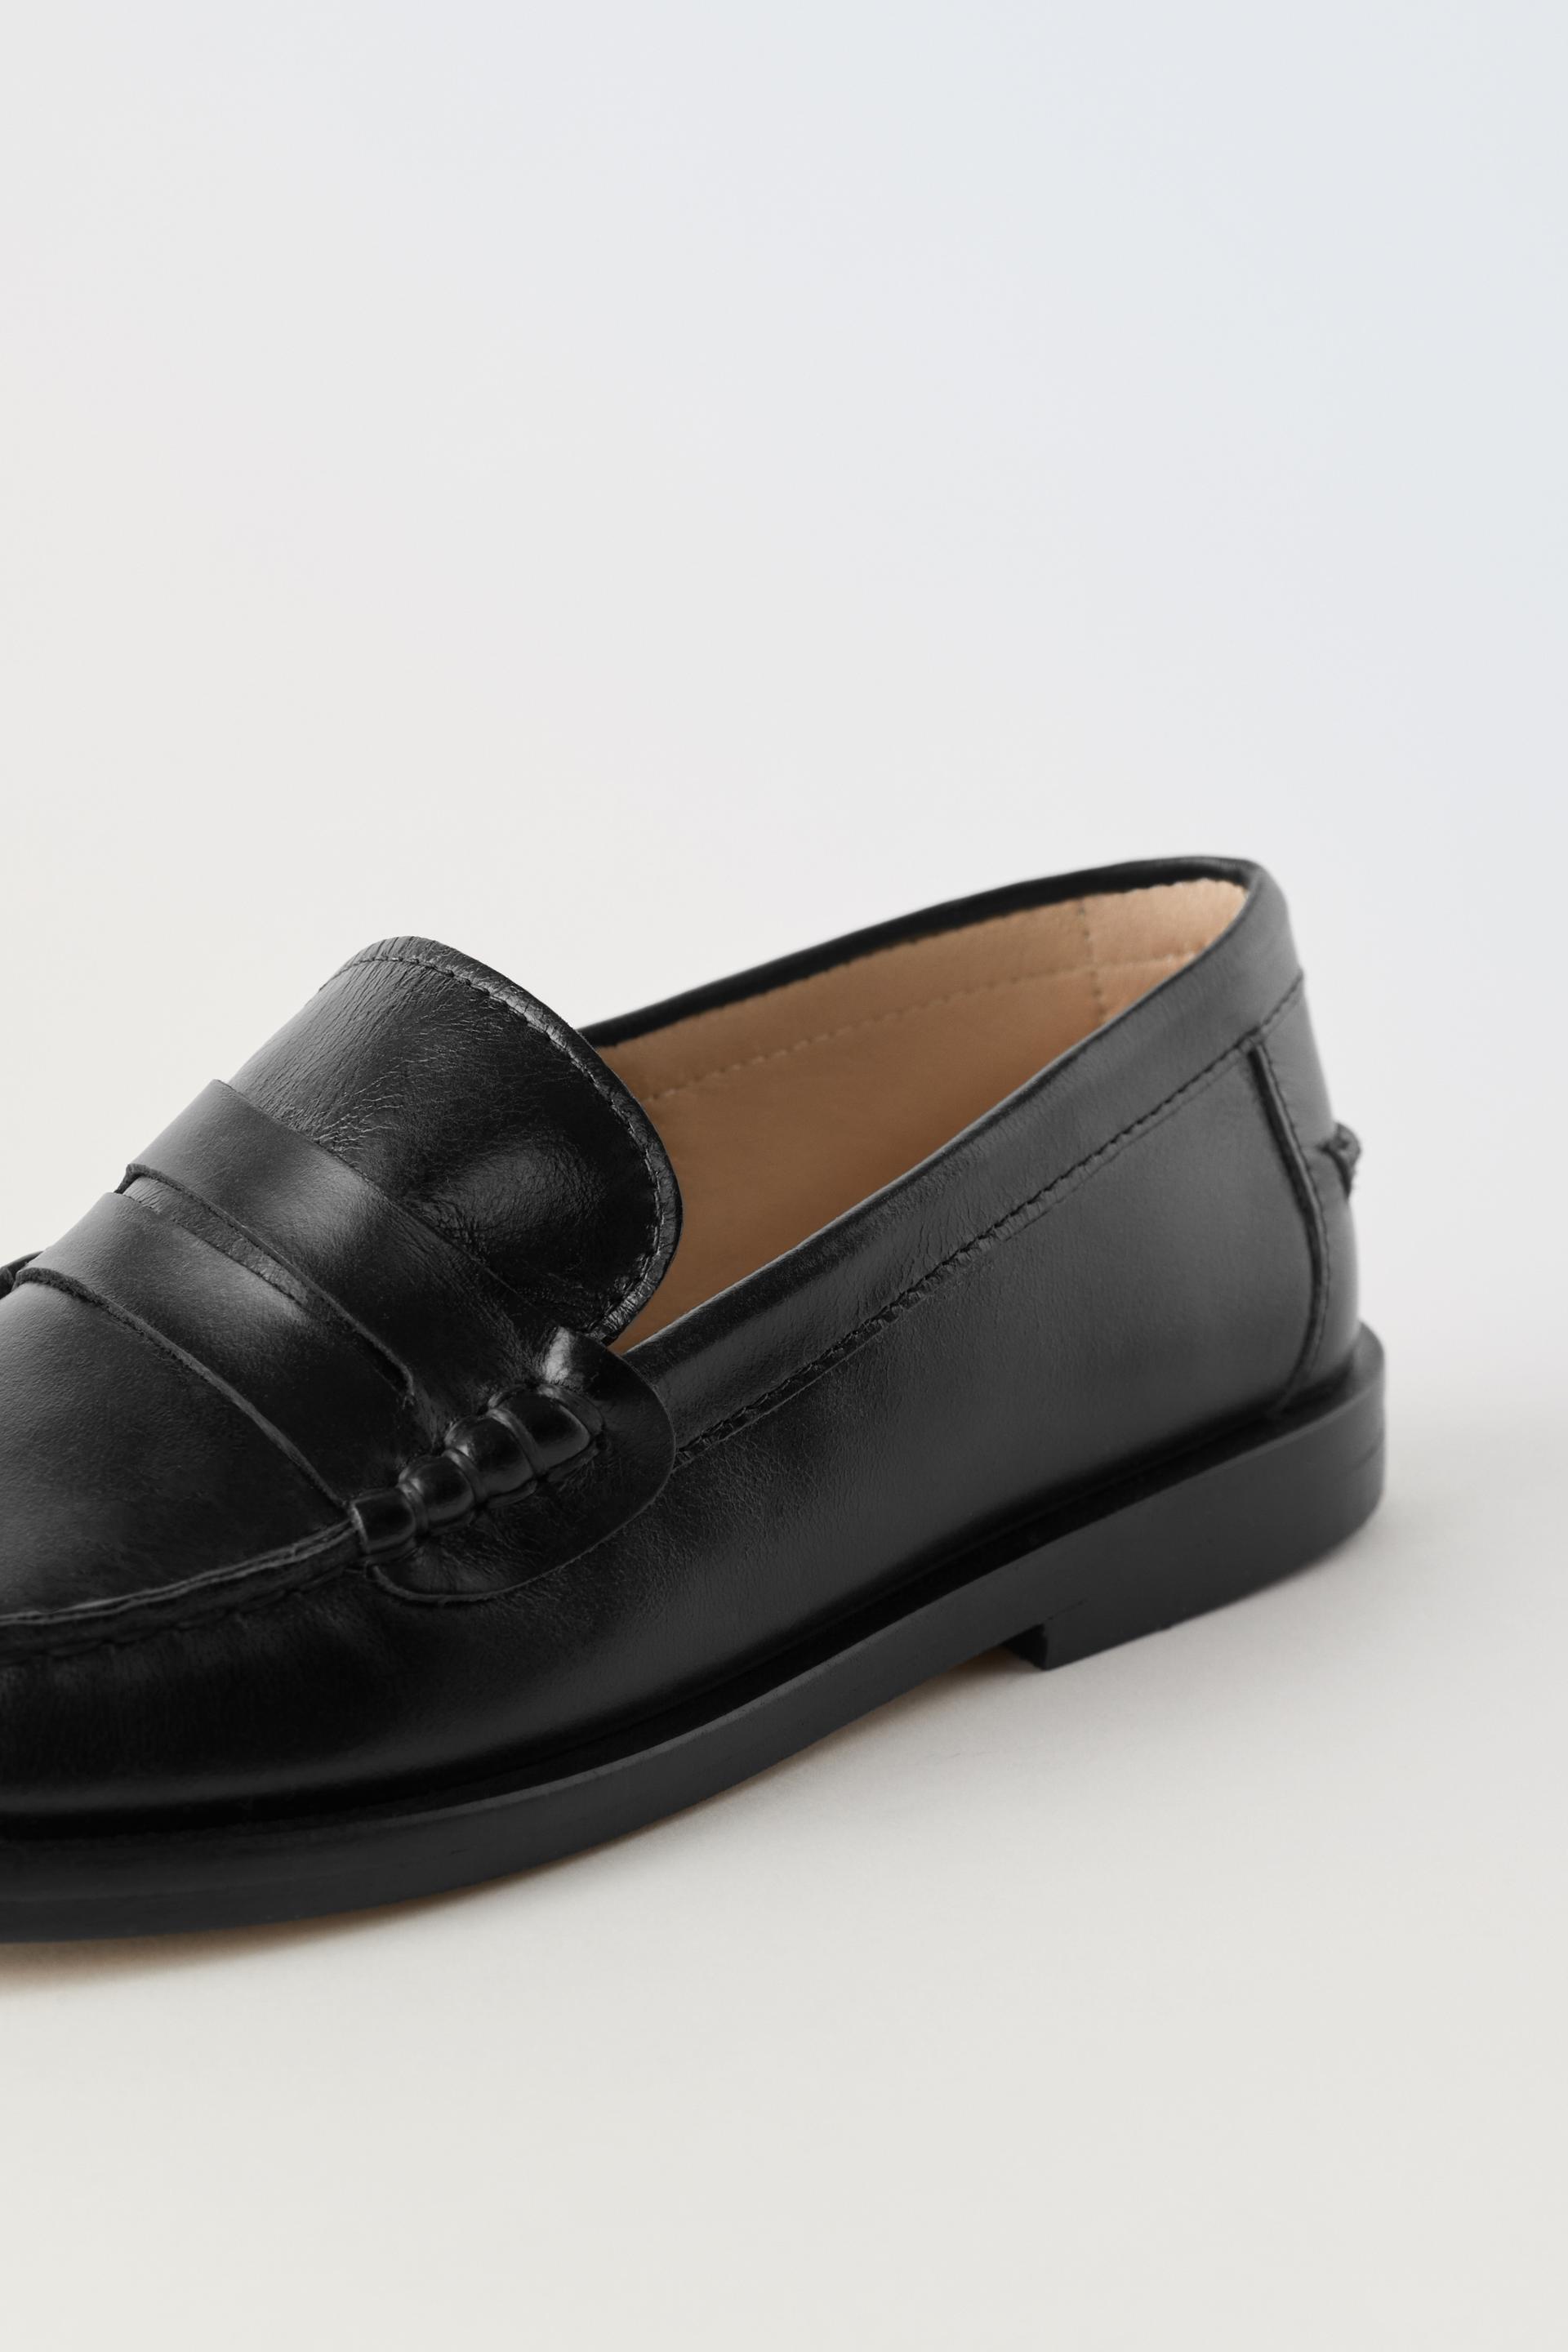 LEATHER LOAFERS - Black